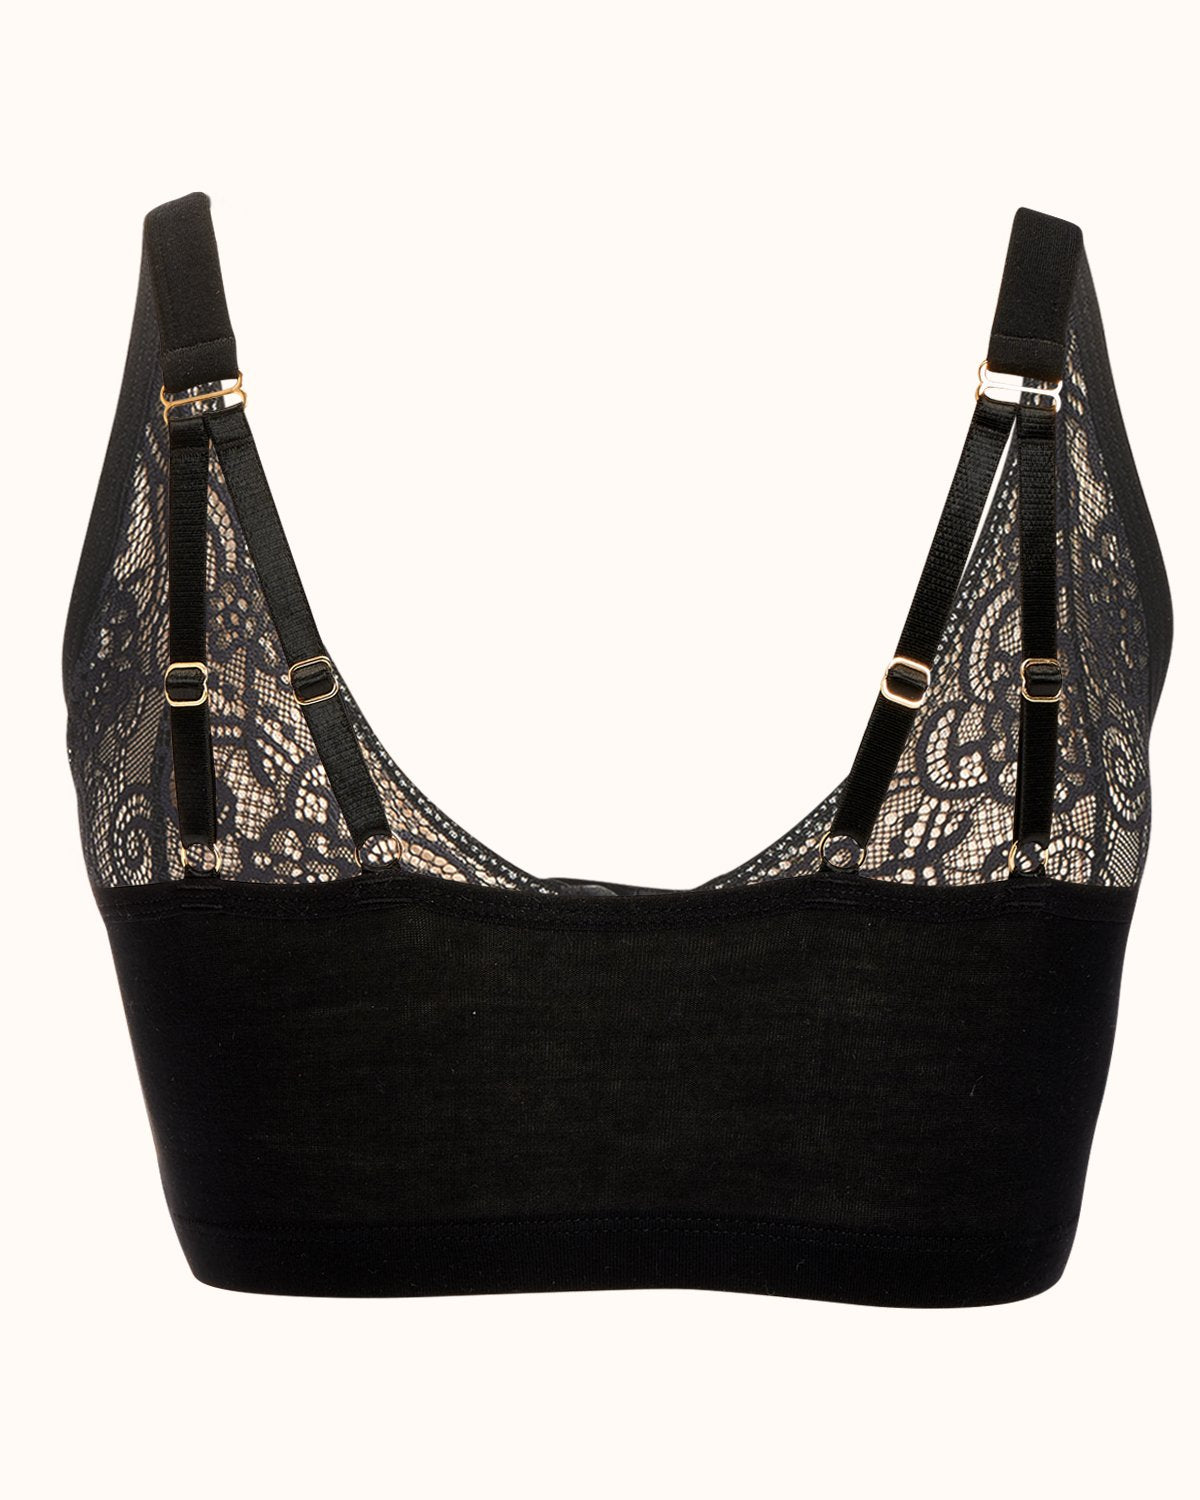 JAMIELEE UNILATERAL FRONT CLOSURE LACE BRA: $120 BDS /